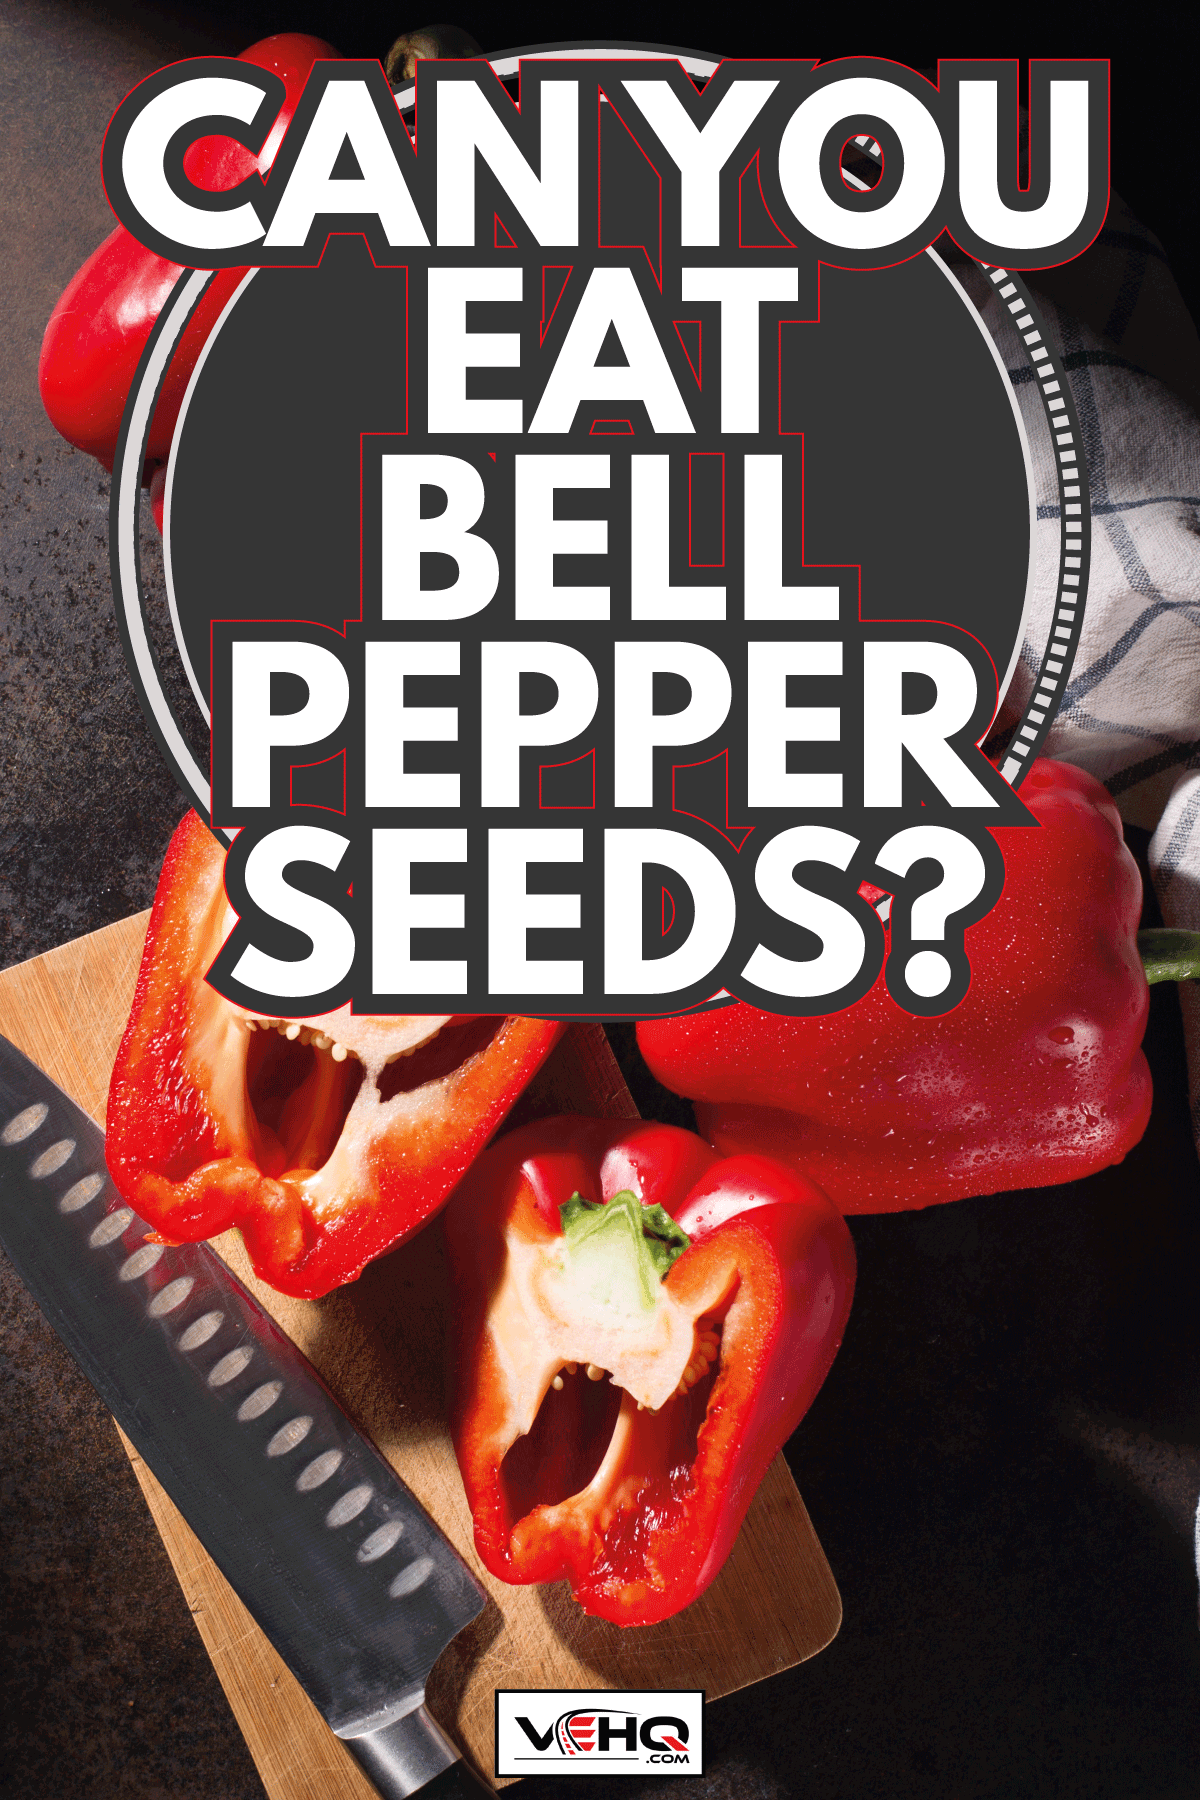 Fresh sweet red peppers and textile white blue towel on dark rustic wooden background. Can You Eat Bell Pepper Seeds